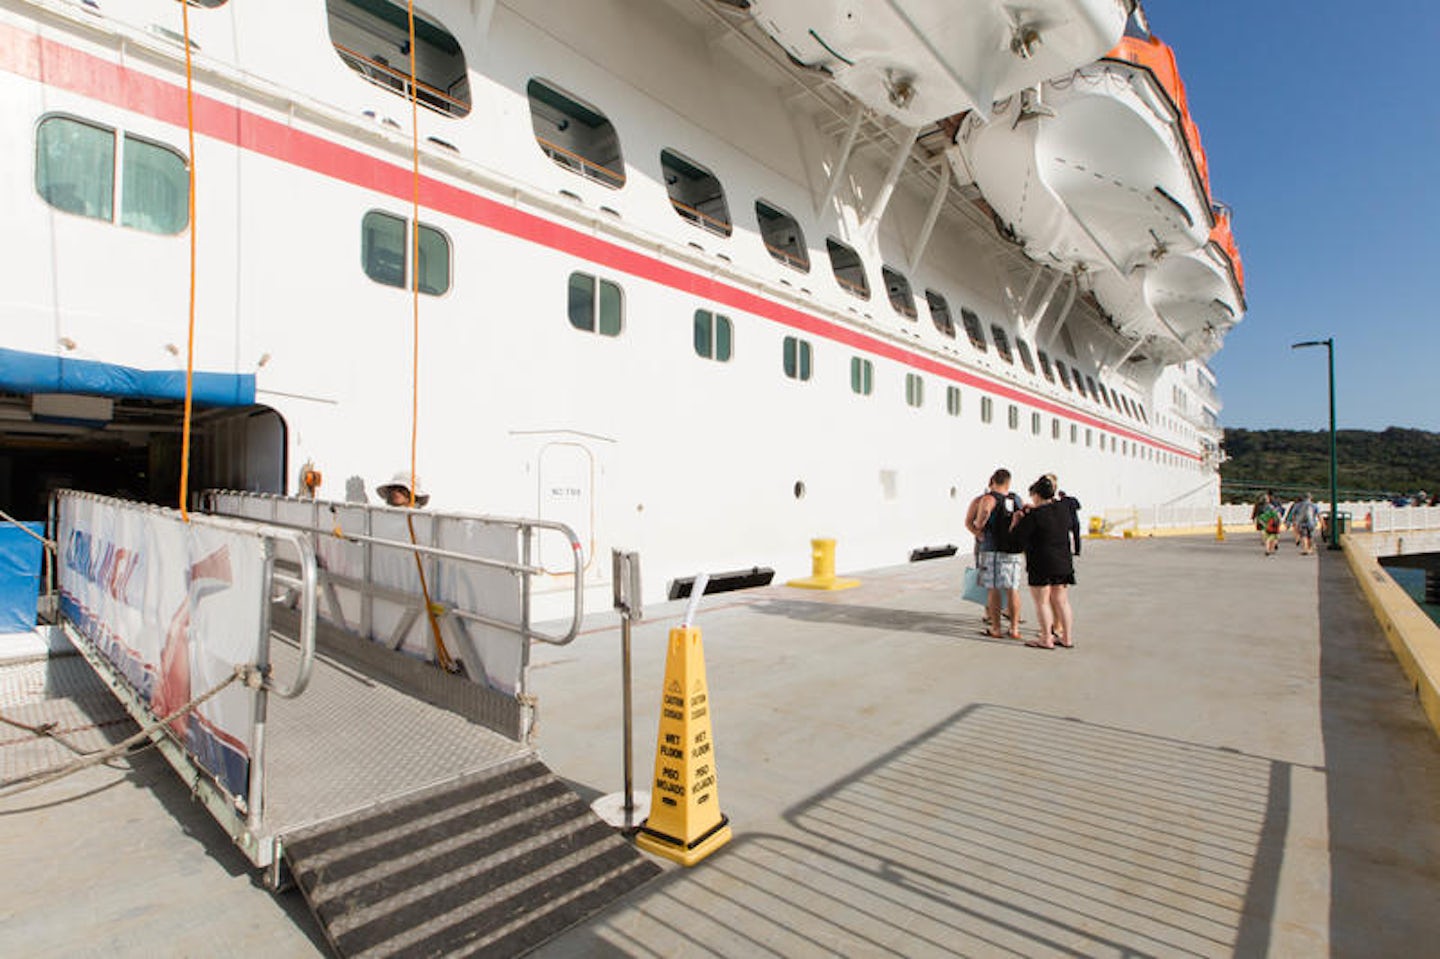 Exterior on Carnival Magic